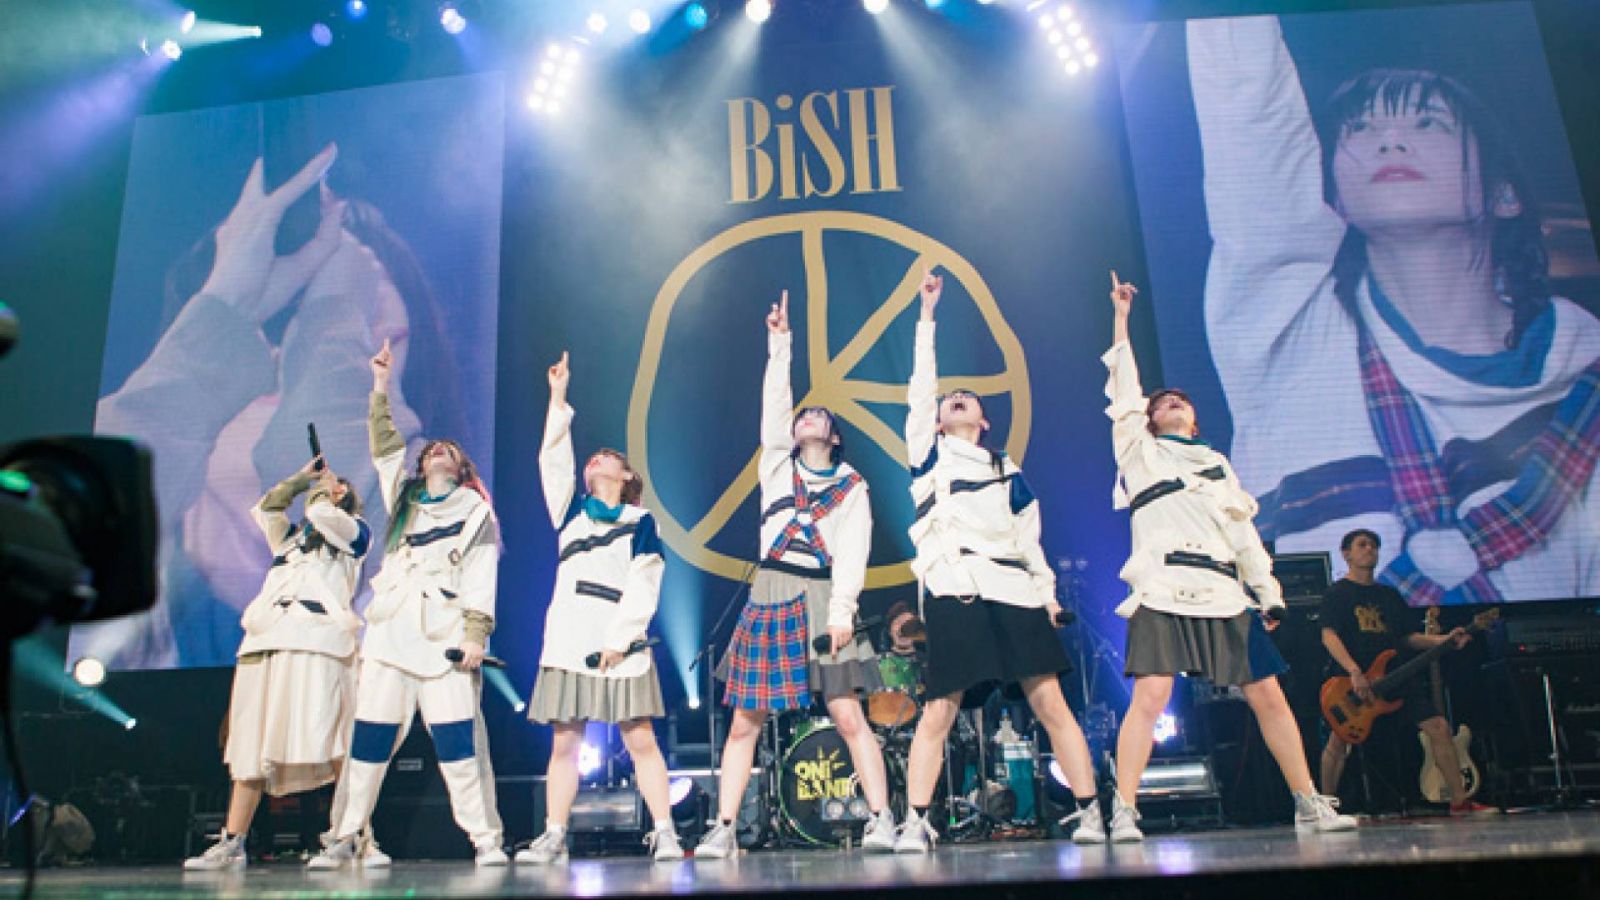 BiSH "NEVERMiND TOUR FiNAL" w ZEPP TOKYO © avex music creative inc. All rights reserved.